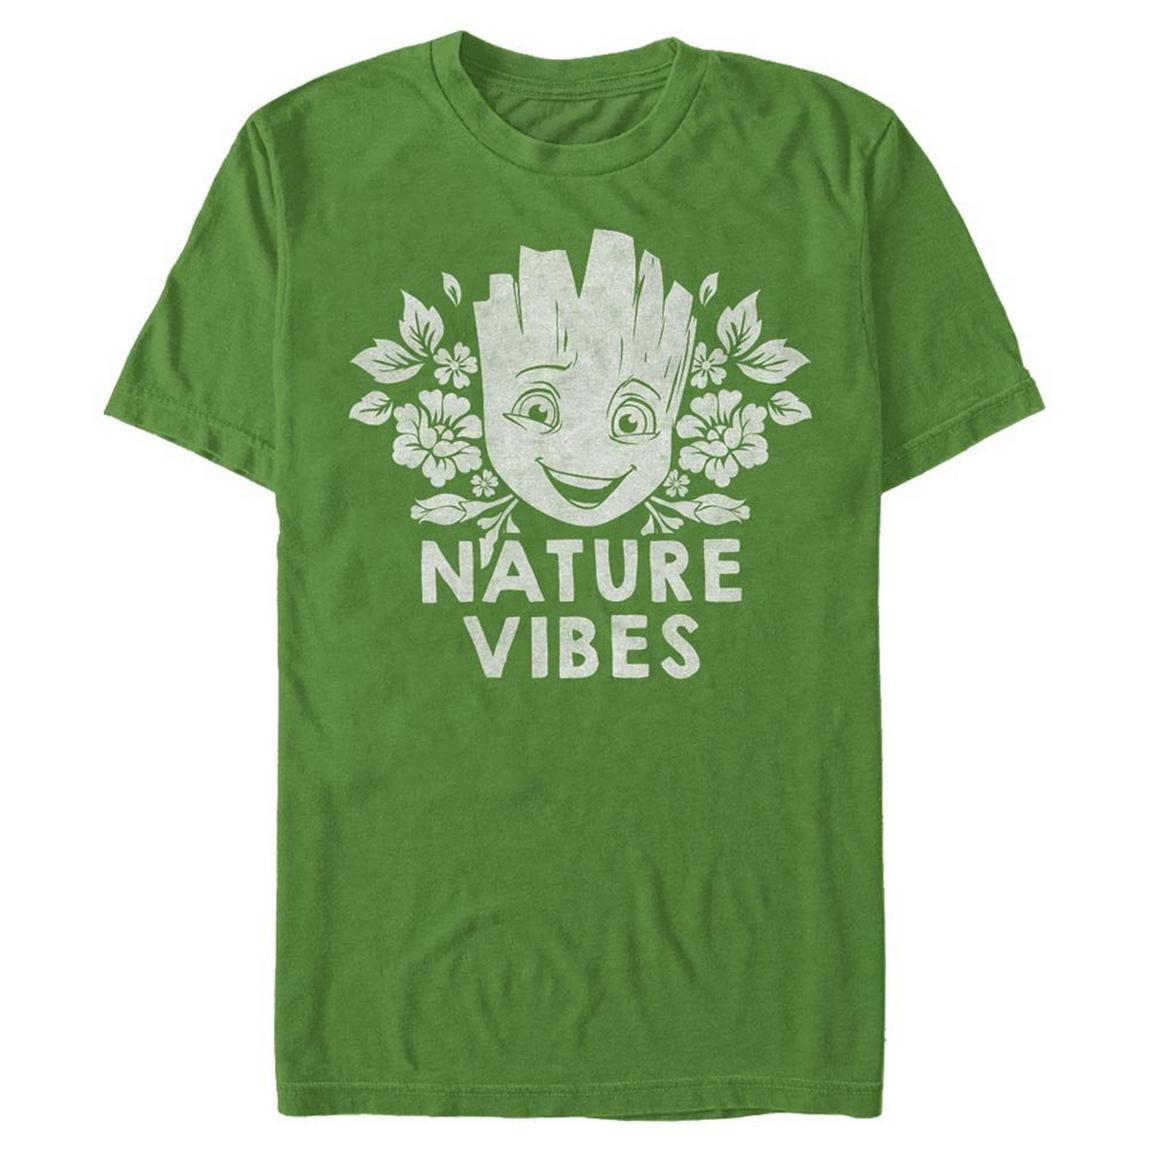 Marvel Guardians of the Galaxy Groot Nature Vibes Unisex T-Shirt, Size: Medium, Fifth Sun